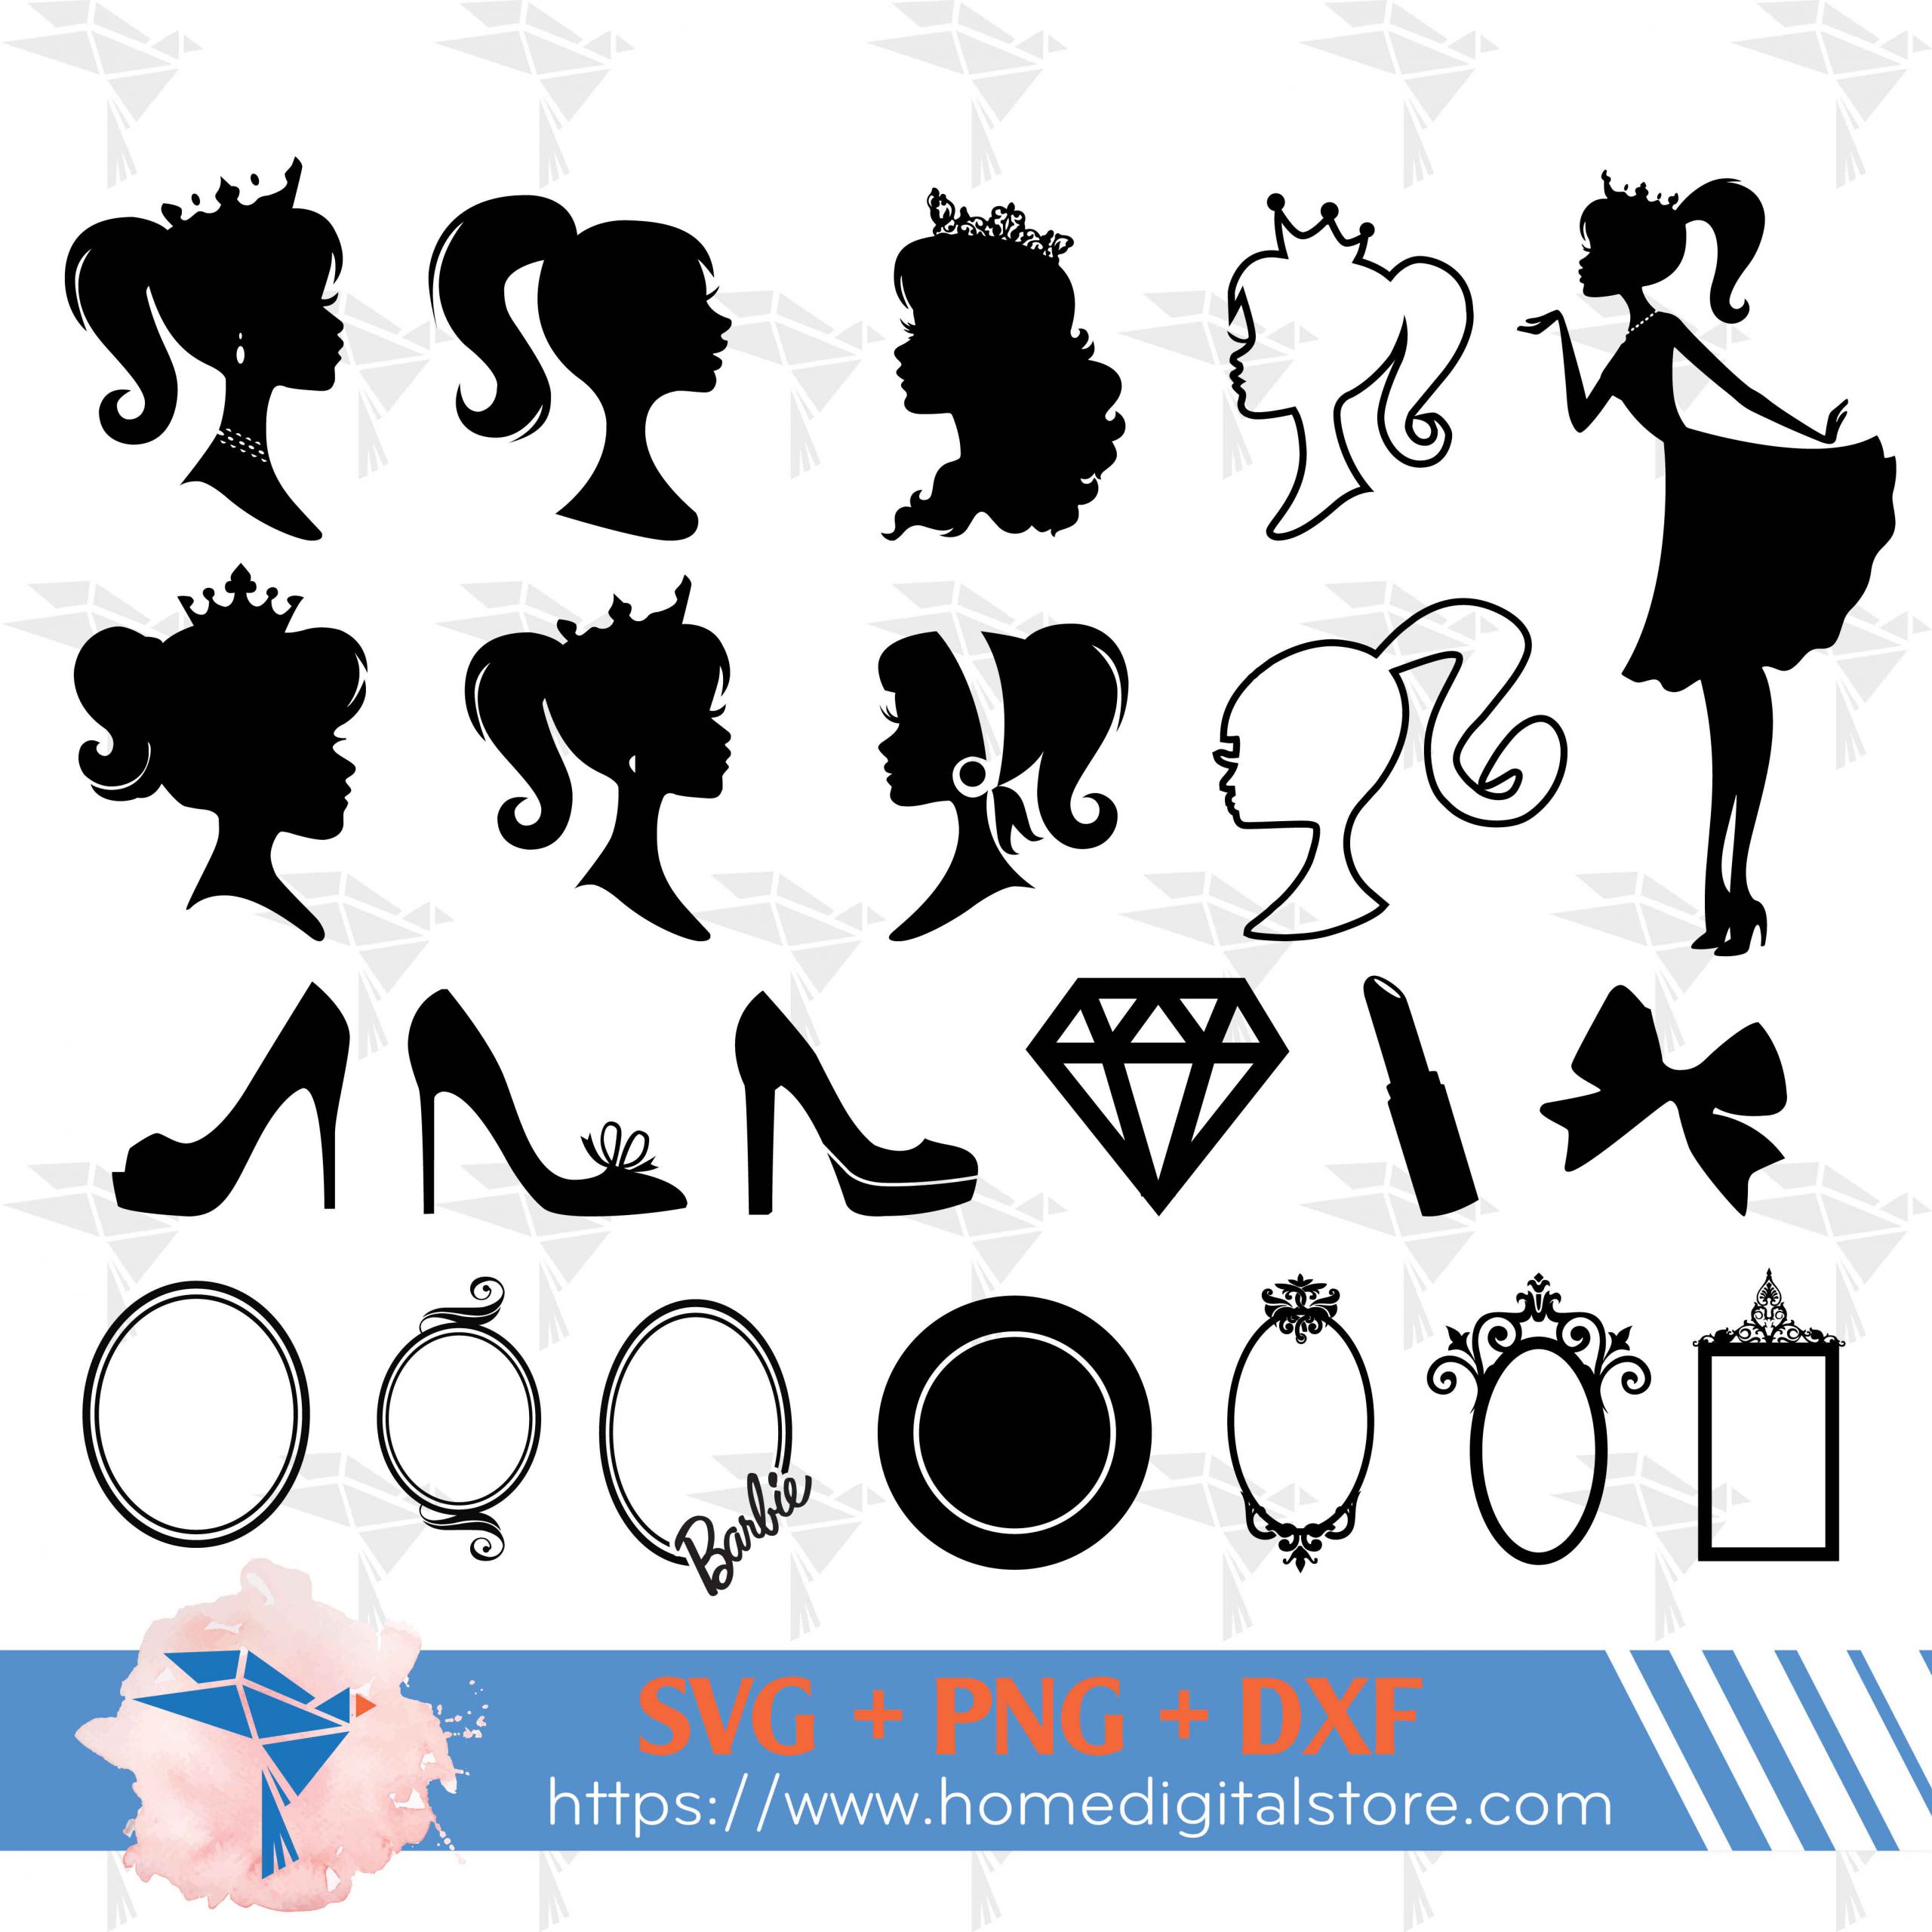 Barbie Logo SVG, PNG, DXF. Instant download files for Cricut Design Space,  Silhouette, Cutting, Printing, or more